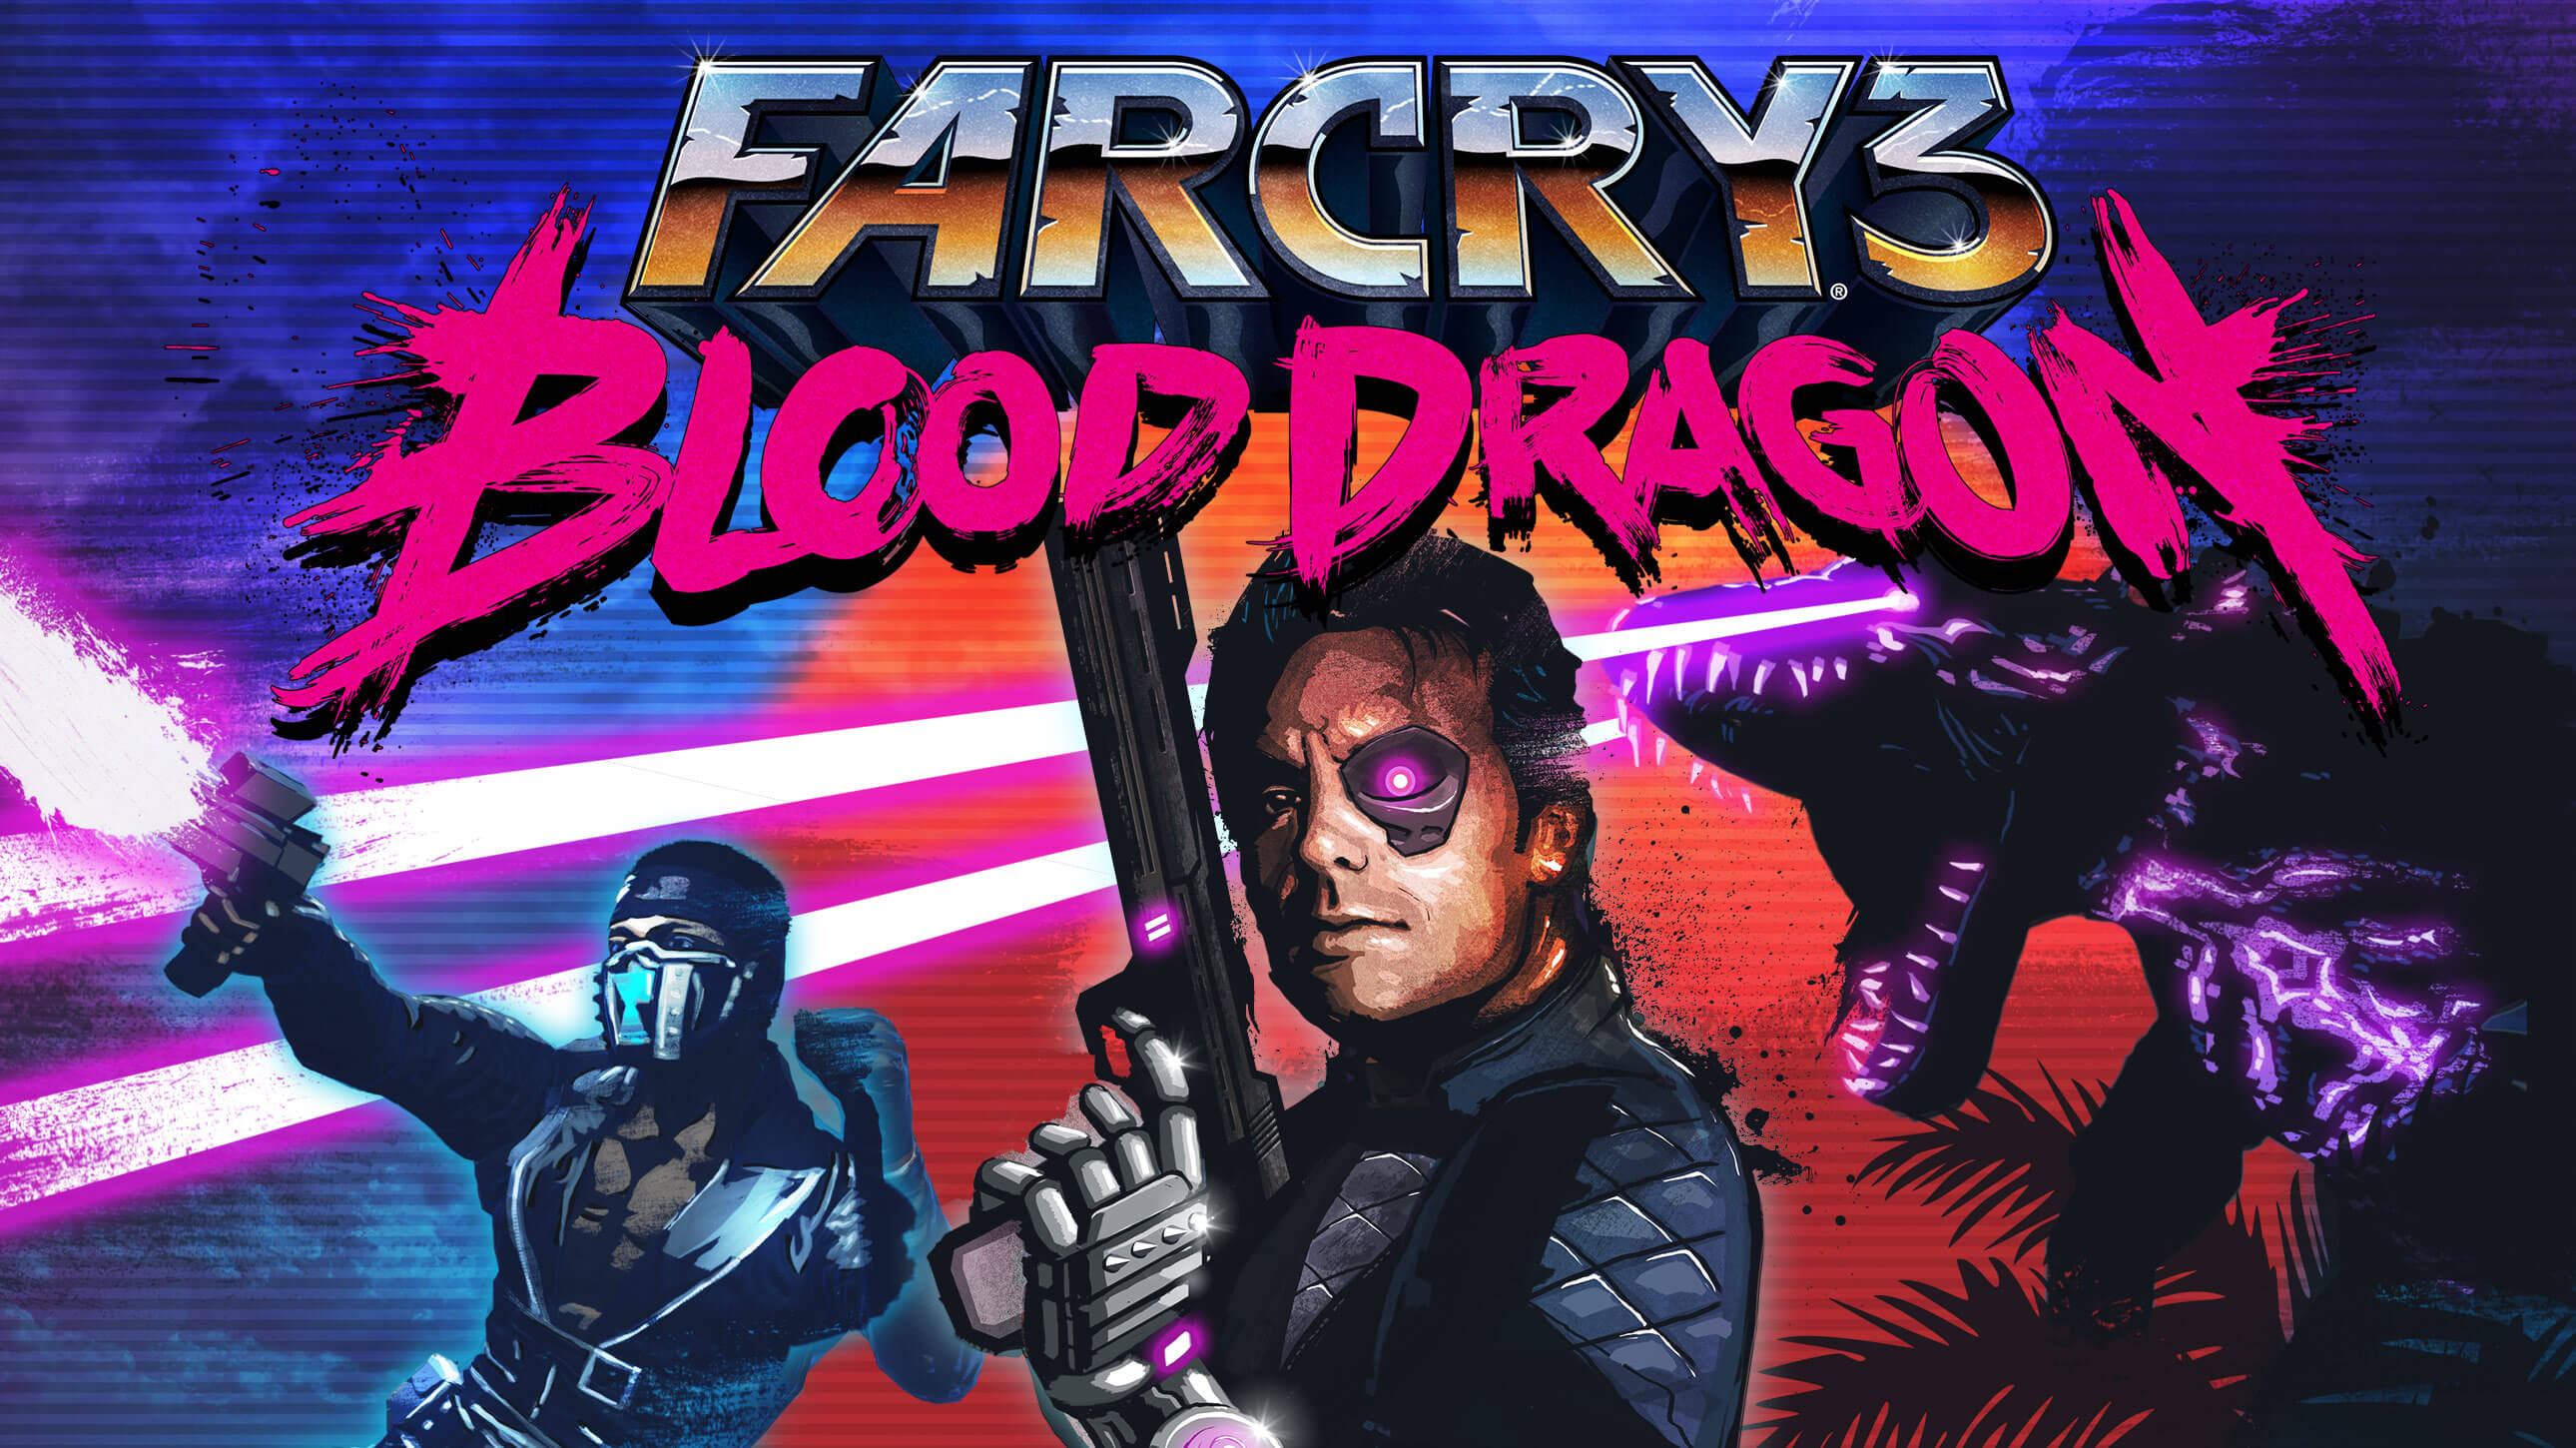 Far Cry 3: Blood Dragon is a 2013 first-person shooter game developed by Ubisoft Montreal and published by Ubisoft. It is a standalone expansion to 2012's Far Cry 3 and the eighth overall installment in the Far Cry franchise.